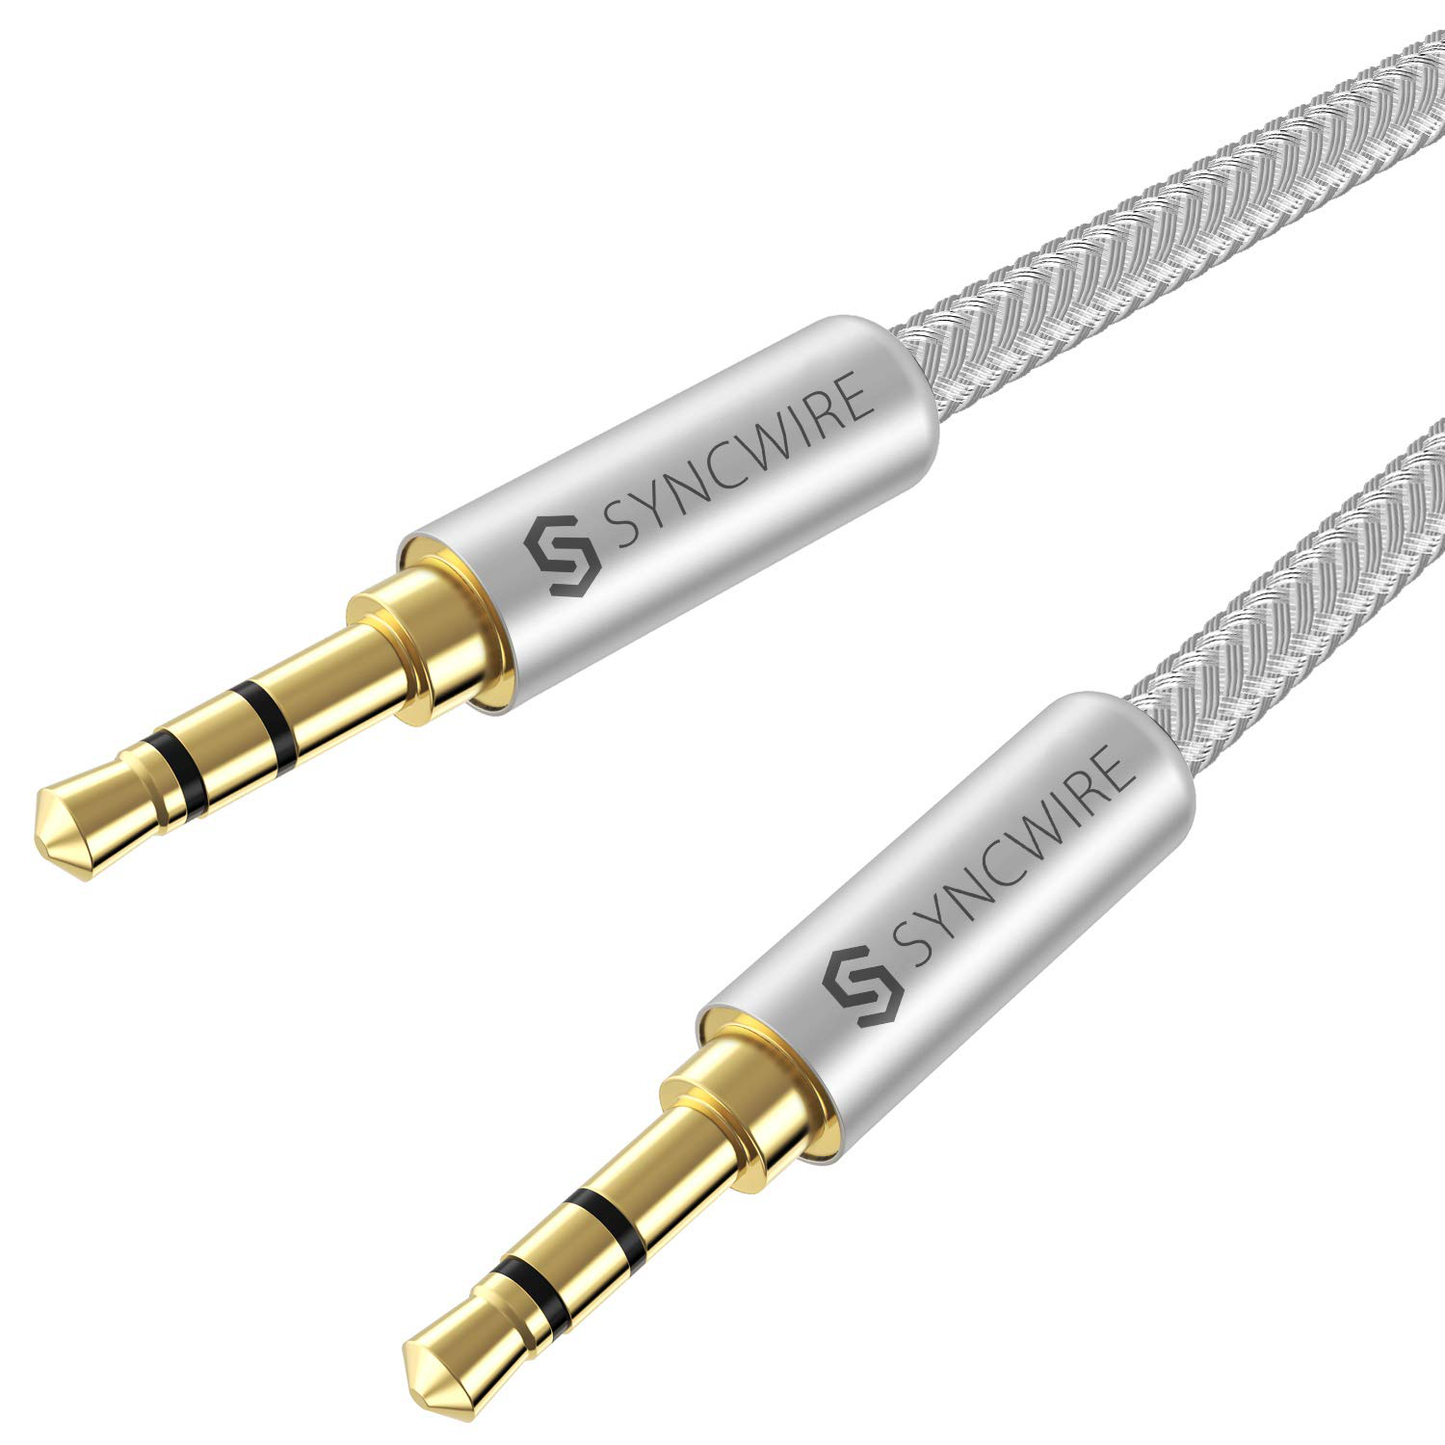 Syncwire 3.5mm Nylon Braided Aux Cable Audio Auxiliary Input Adapter Male to Male AUX Cord